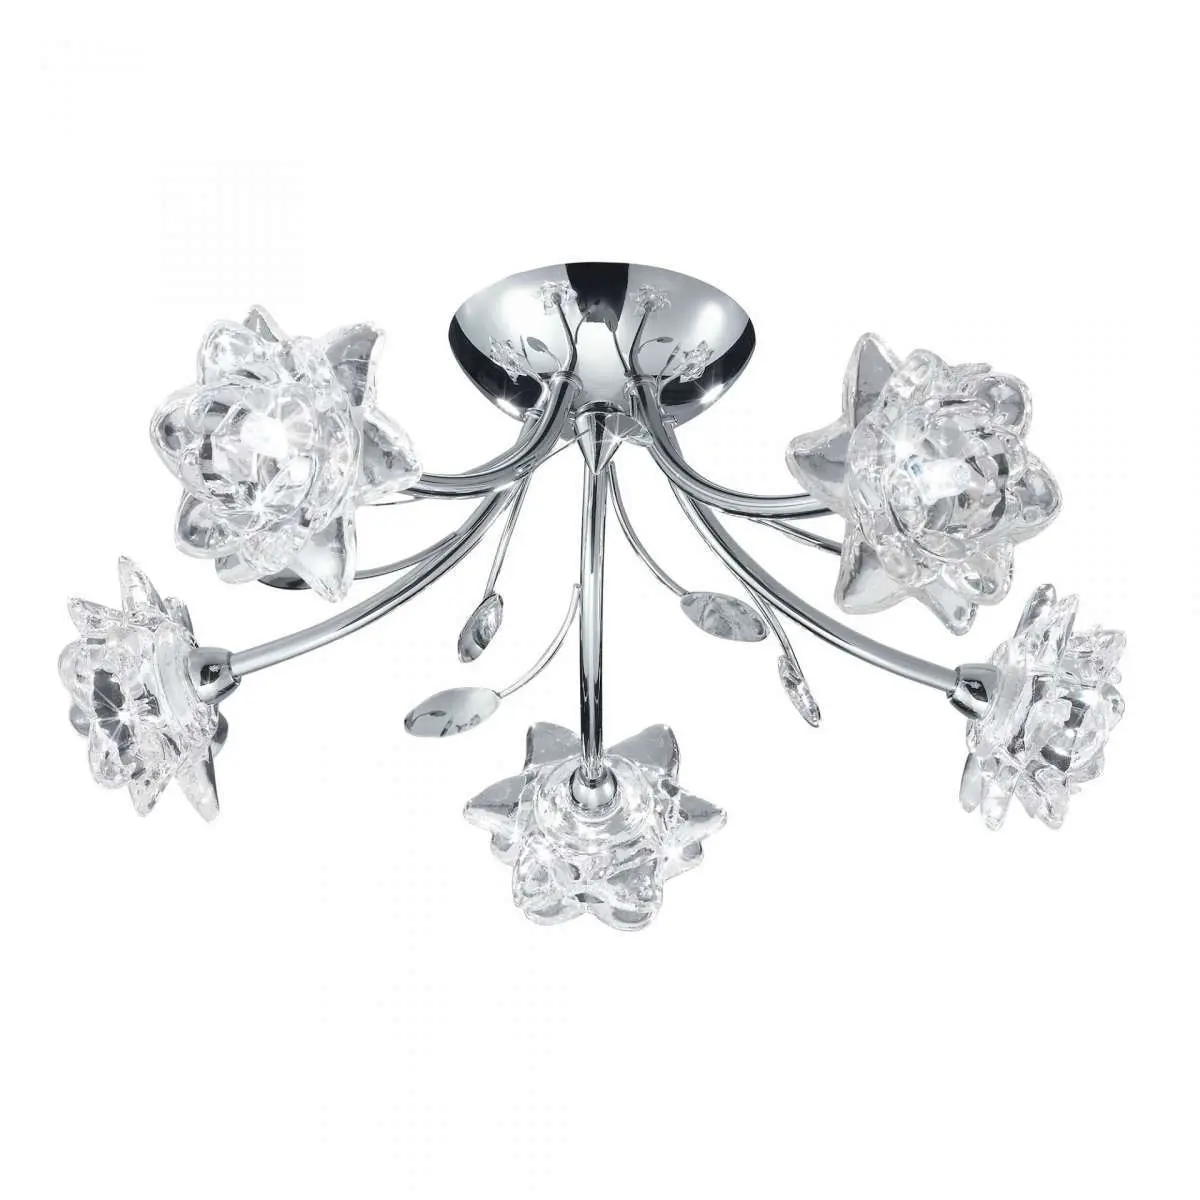 Bellis Chrome 5 Light Fitting With Clear Flower Glass